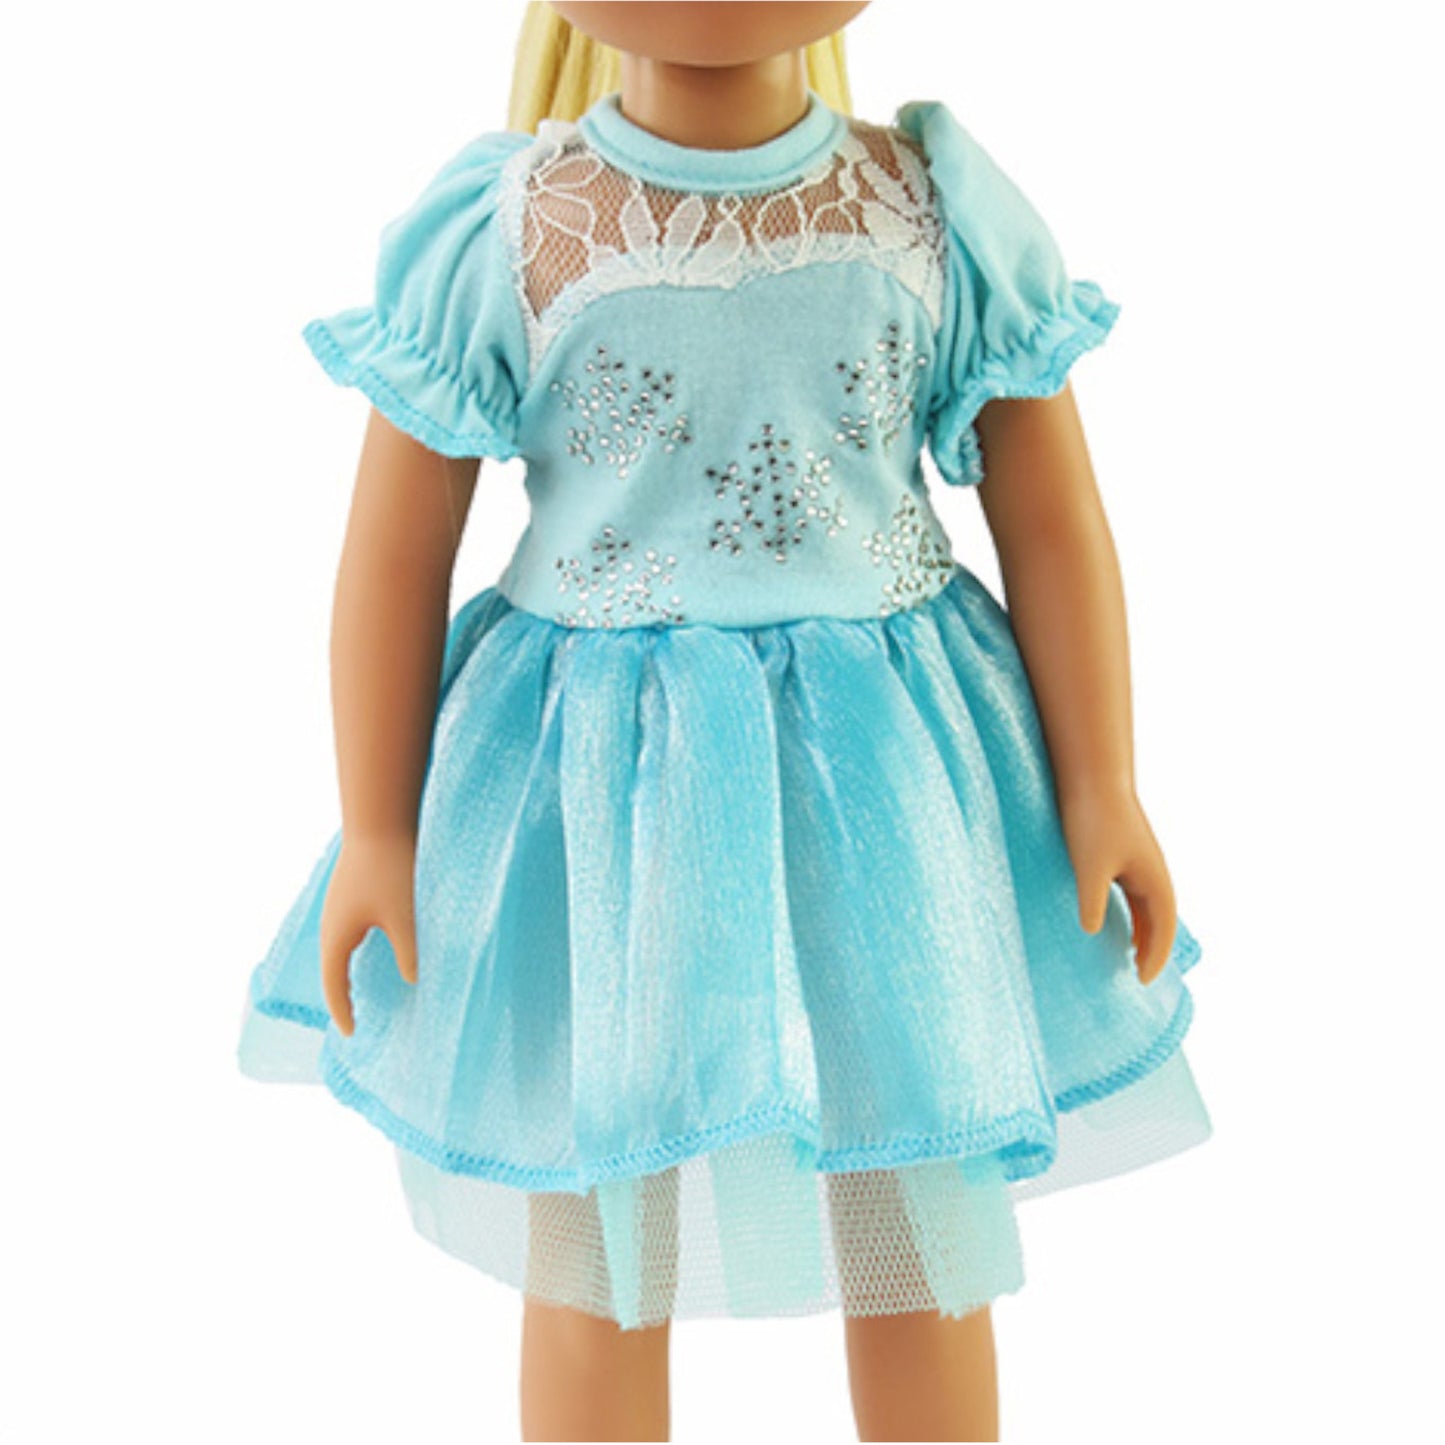 Teal Sparkle Snowflake Dress for 14 1/2-inch dolls with doll Up Close